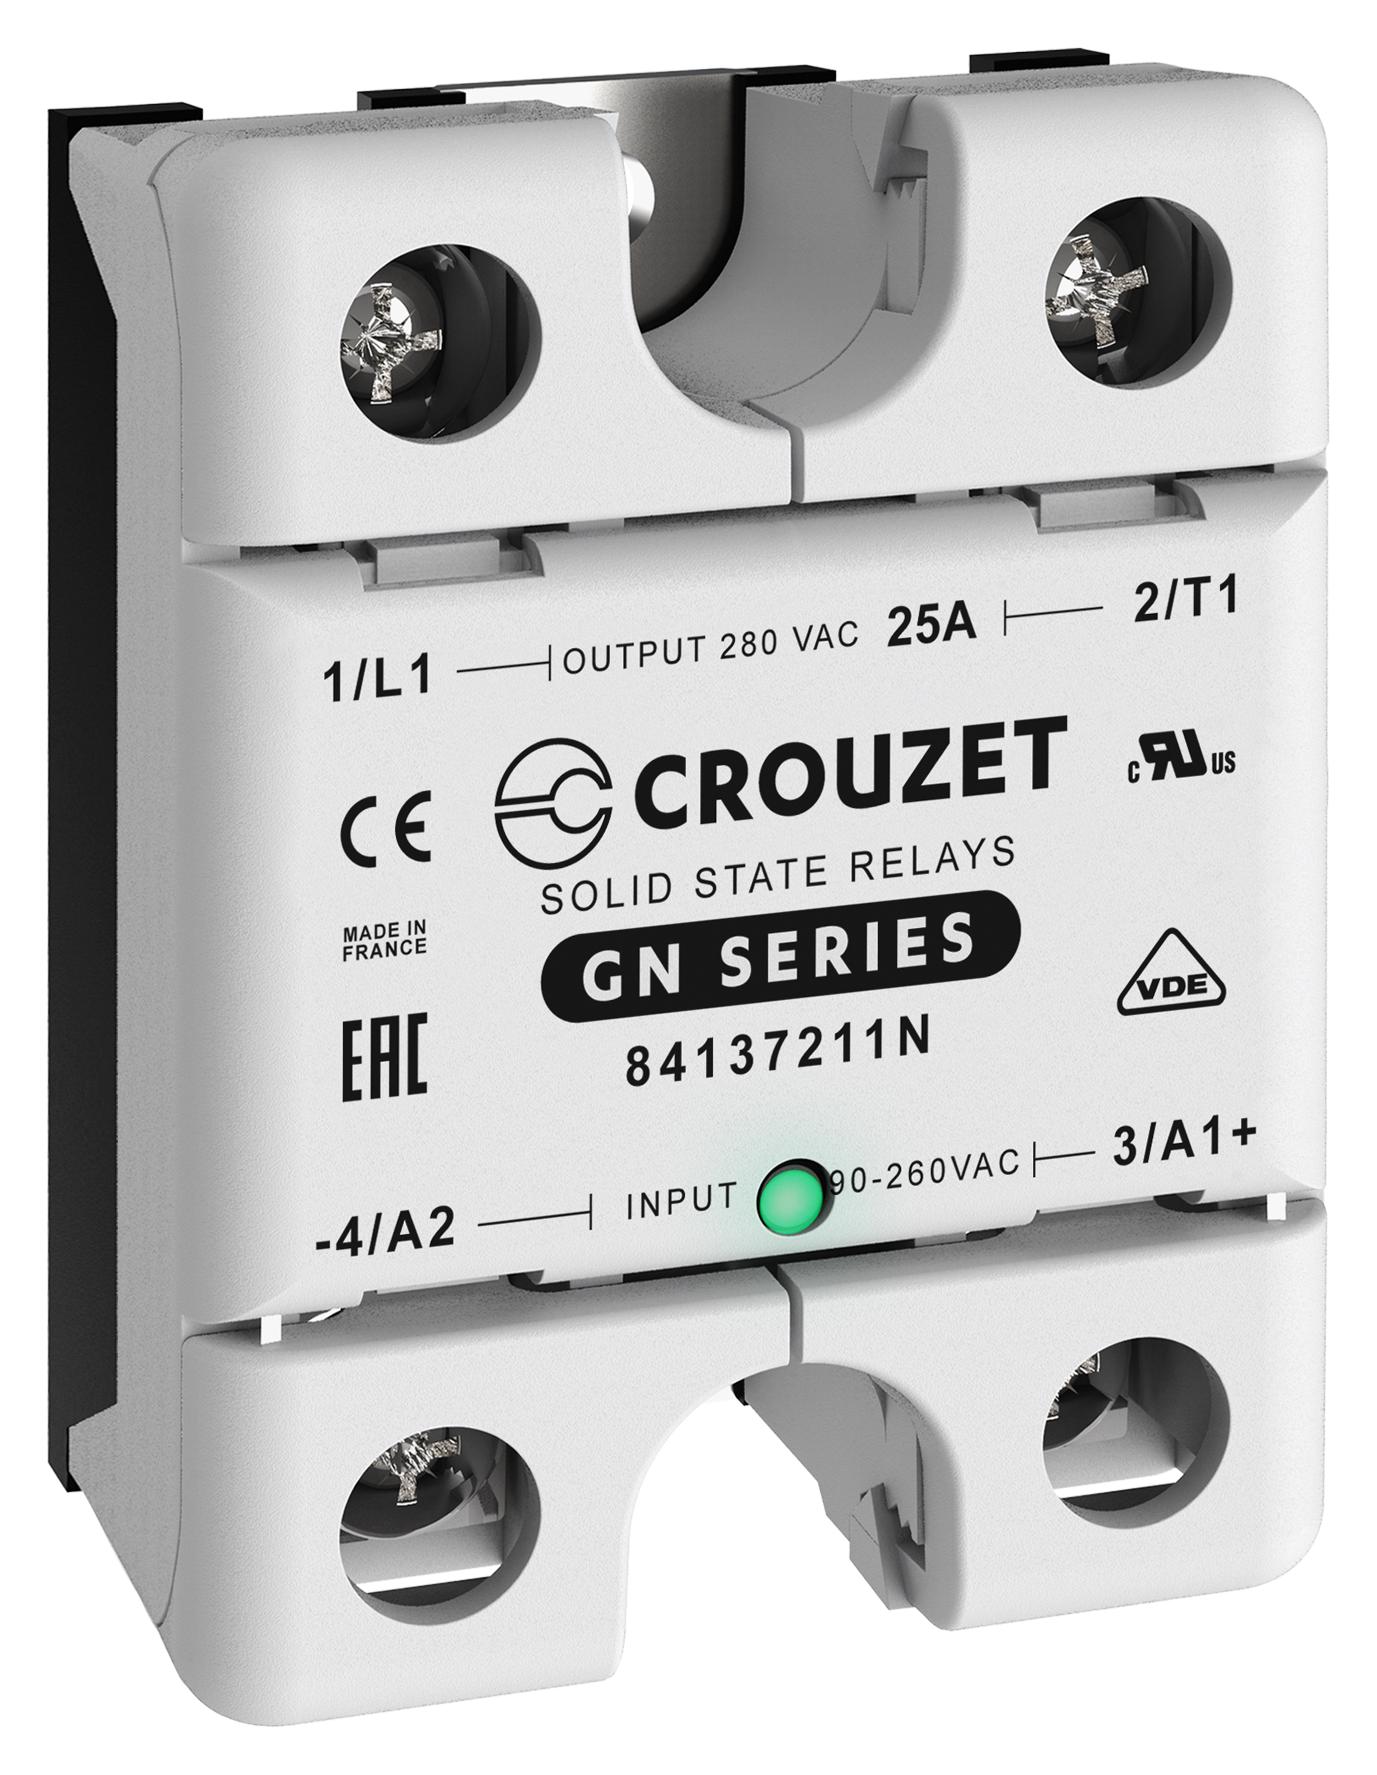 84137211N SOLID STATE RELAY, 25A, 24-280VAC, PANEL CROUZET